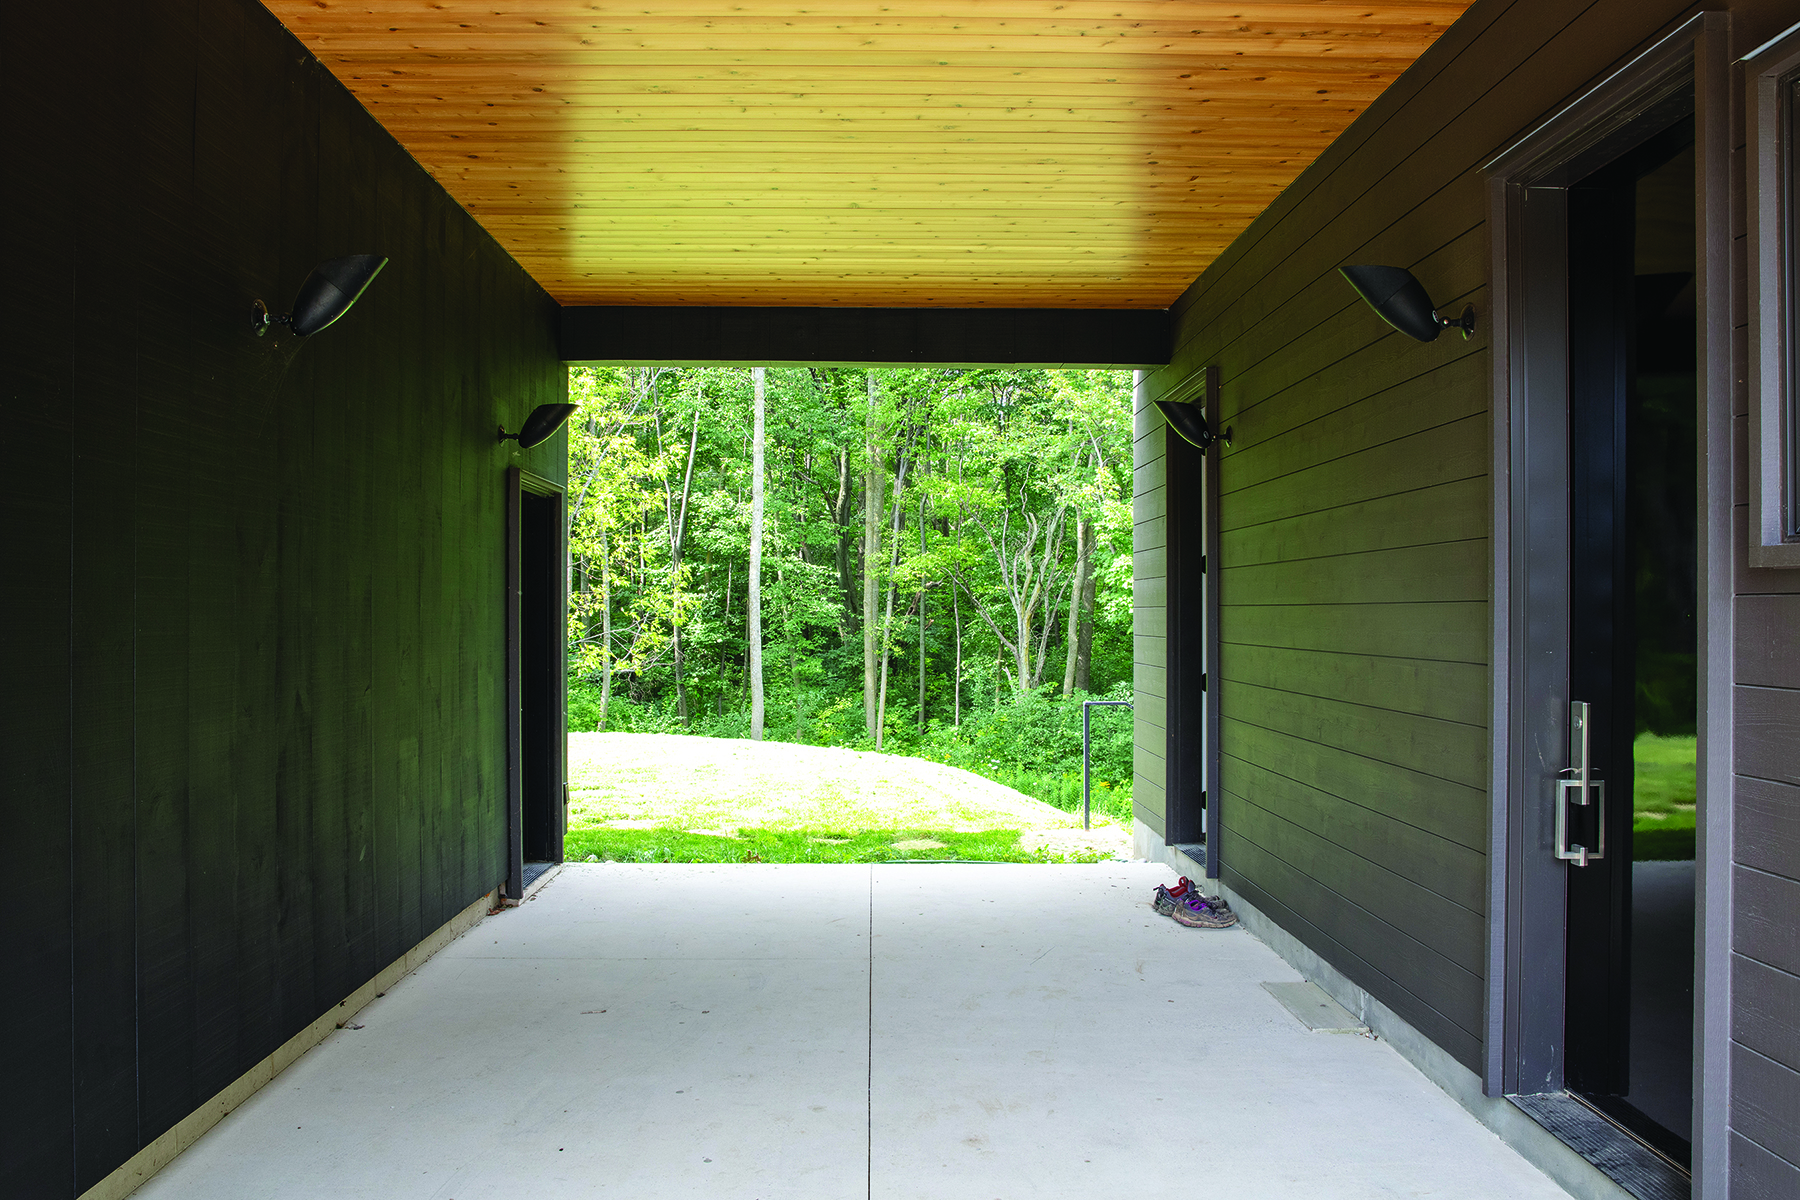 A breezeway separates the garage at left with the house at right.